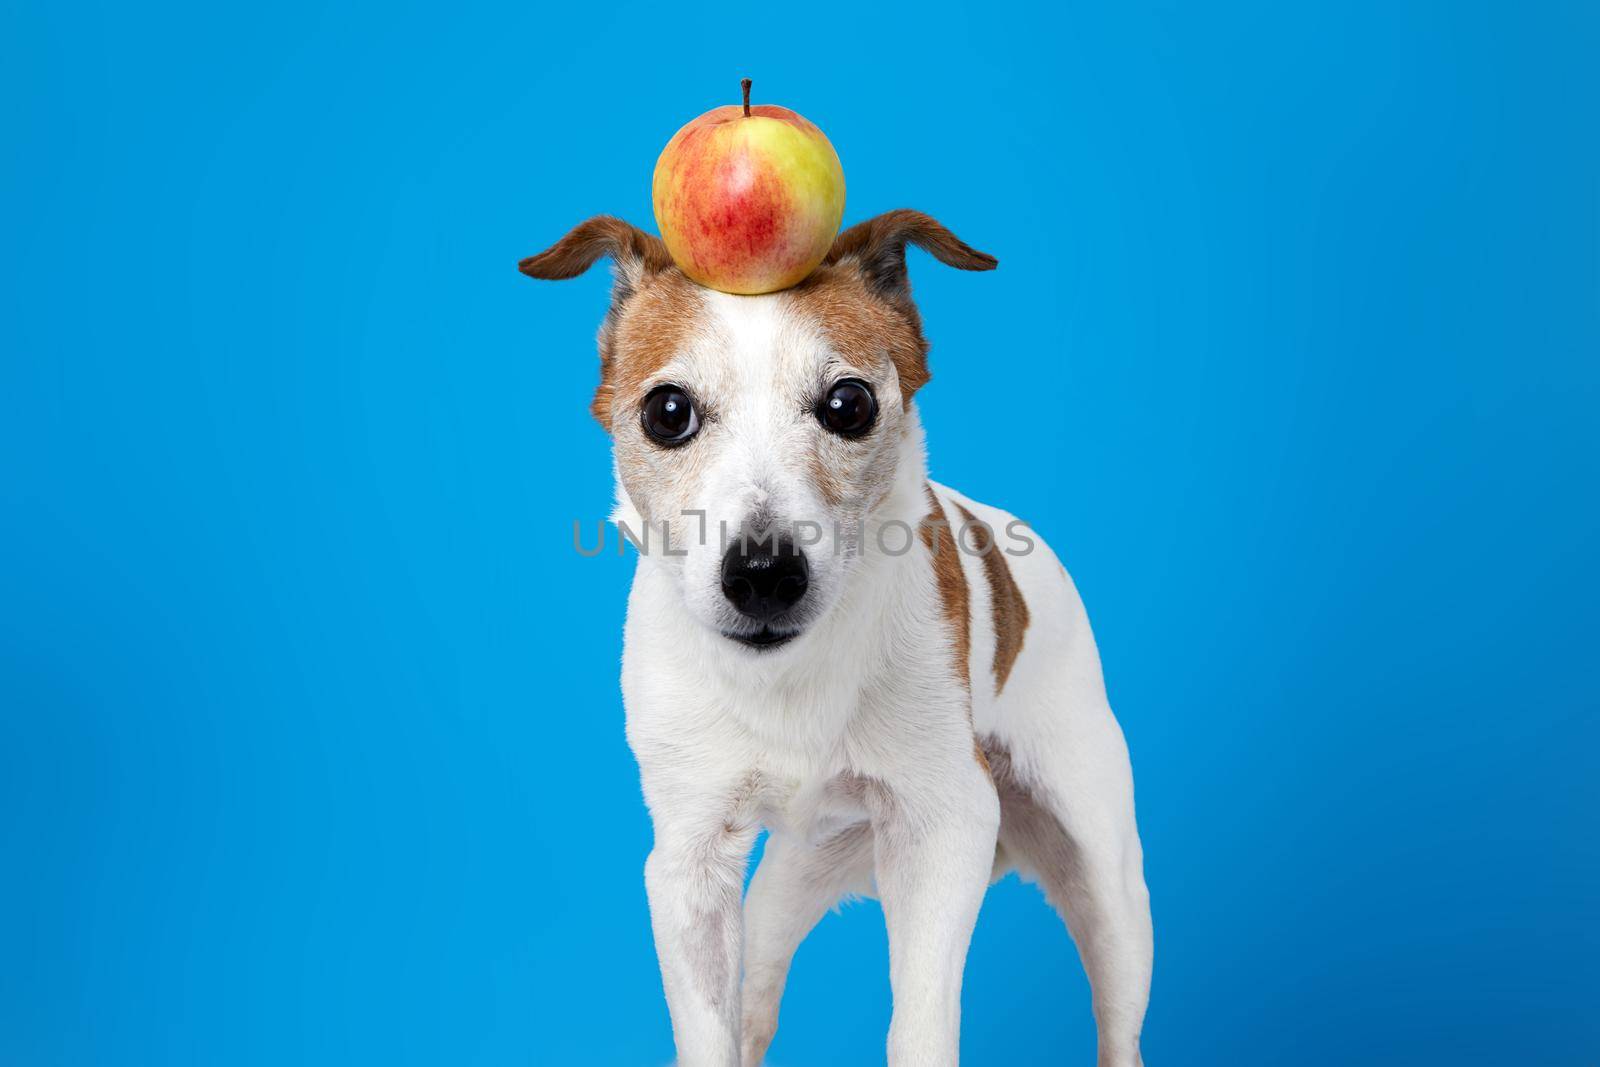 Cute funny Jack Russell Terrier dog with whole fresh yellow apple on head looking at camera against blue background